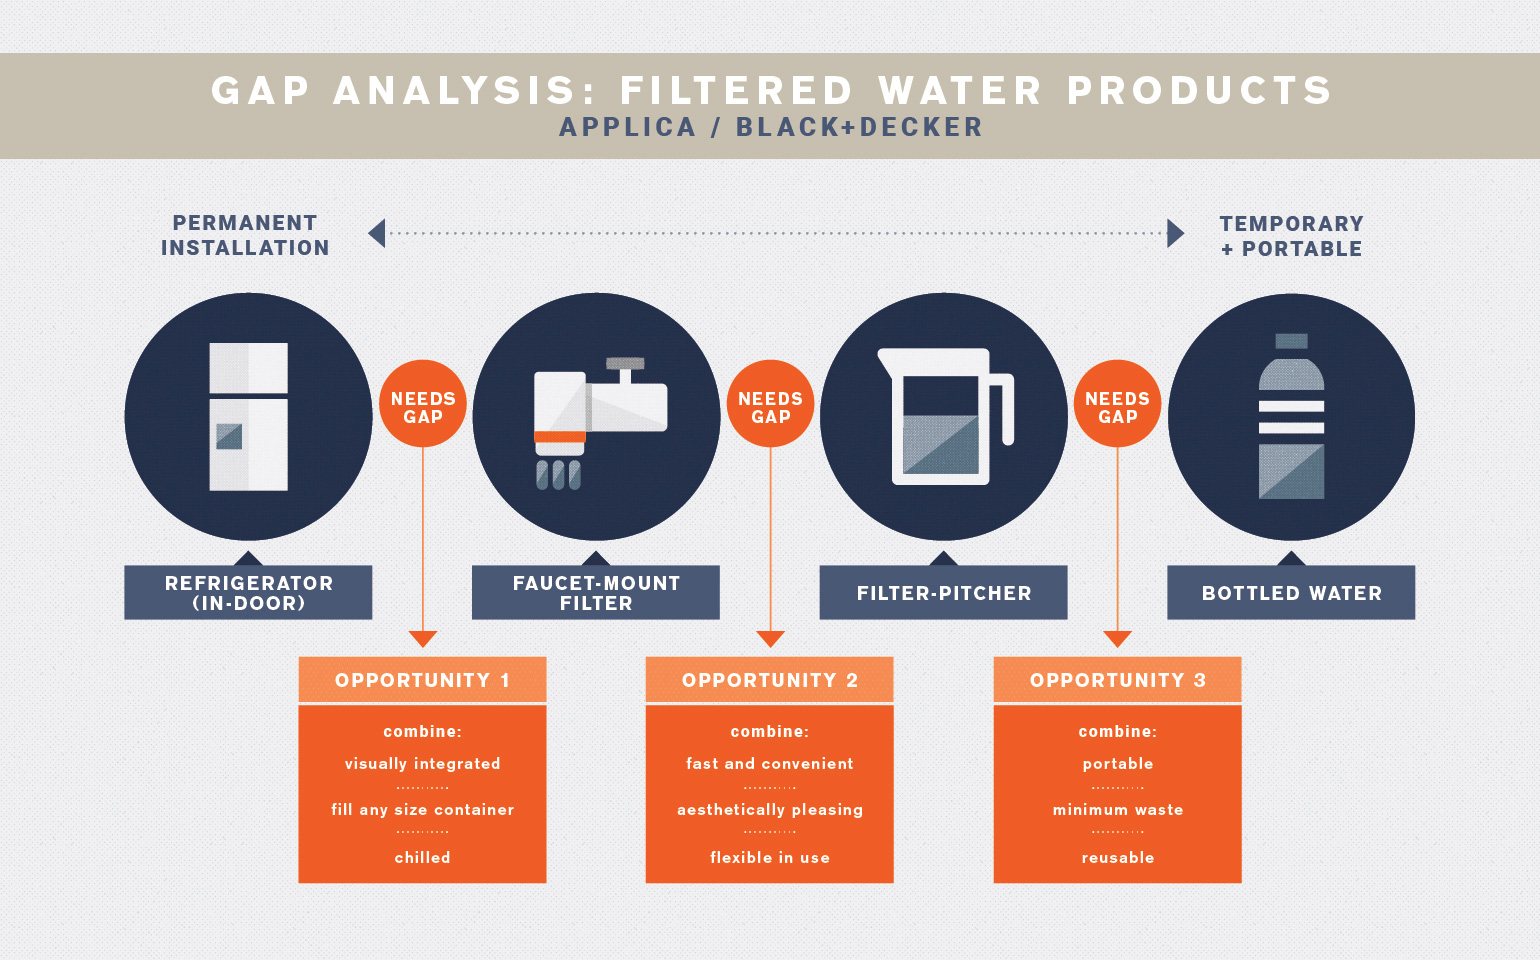 gap analysis for filtered water products